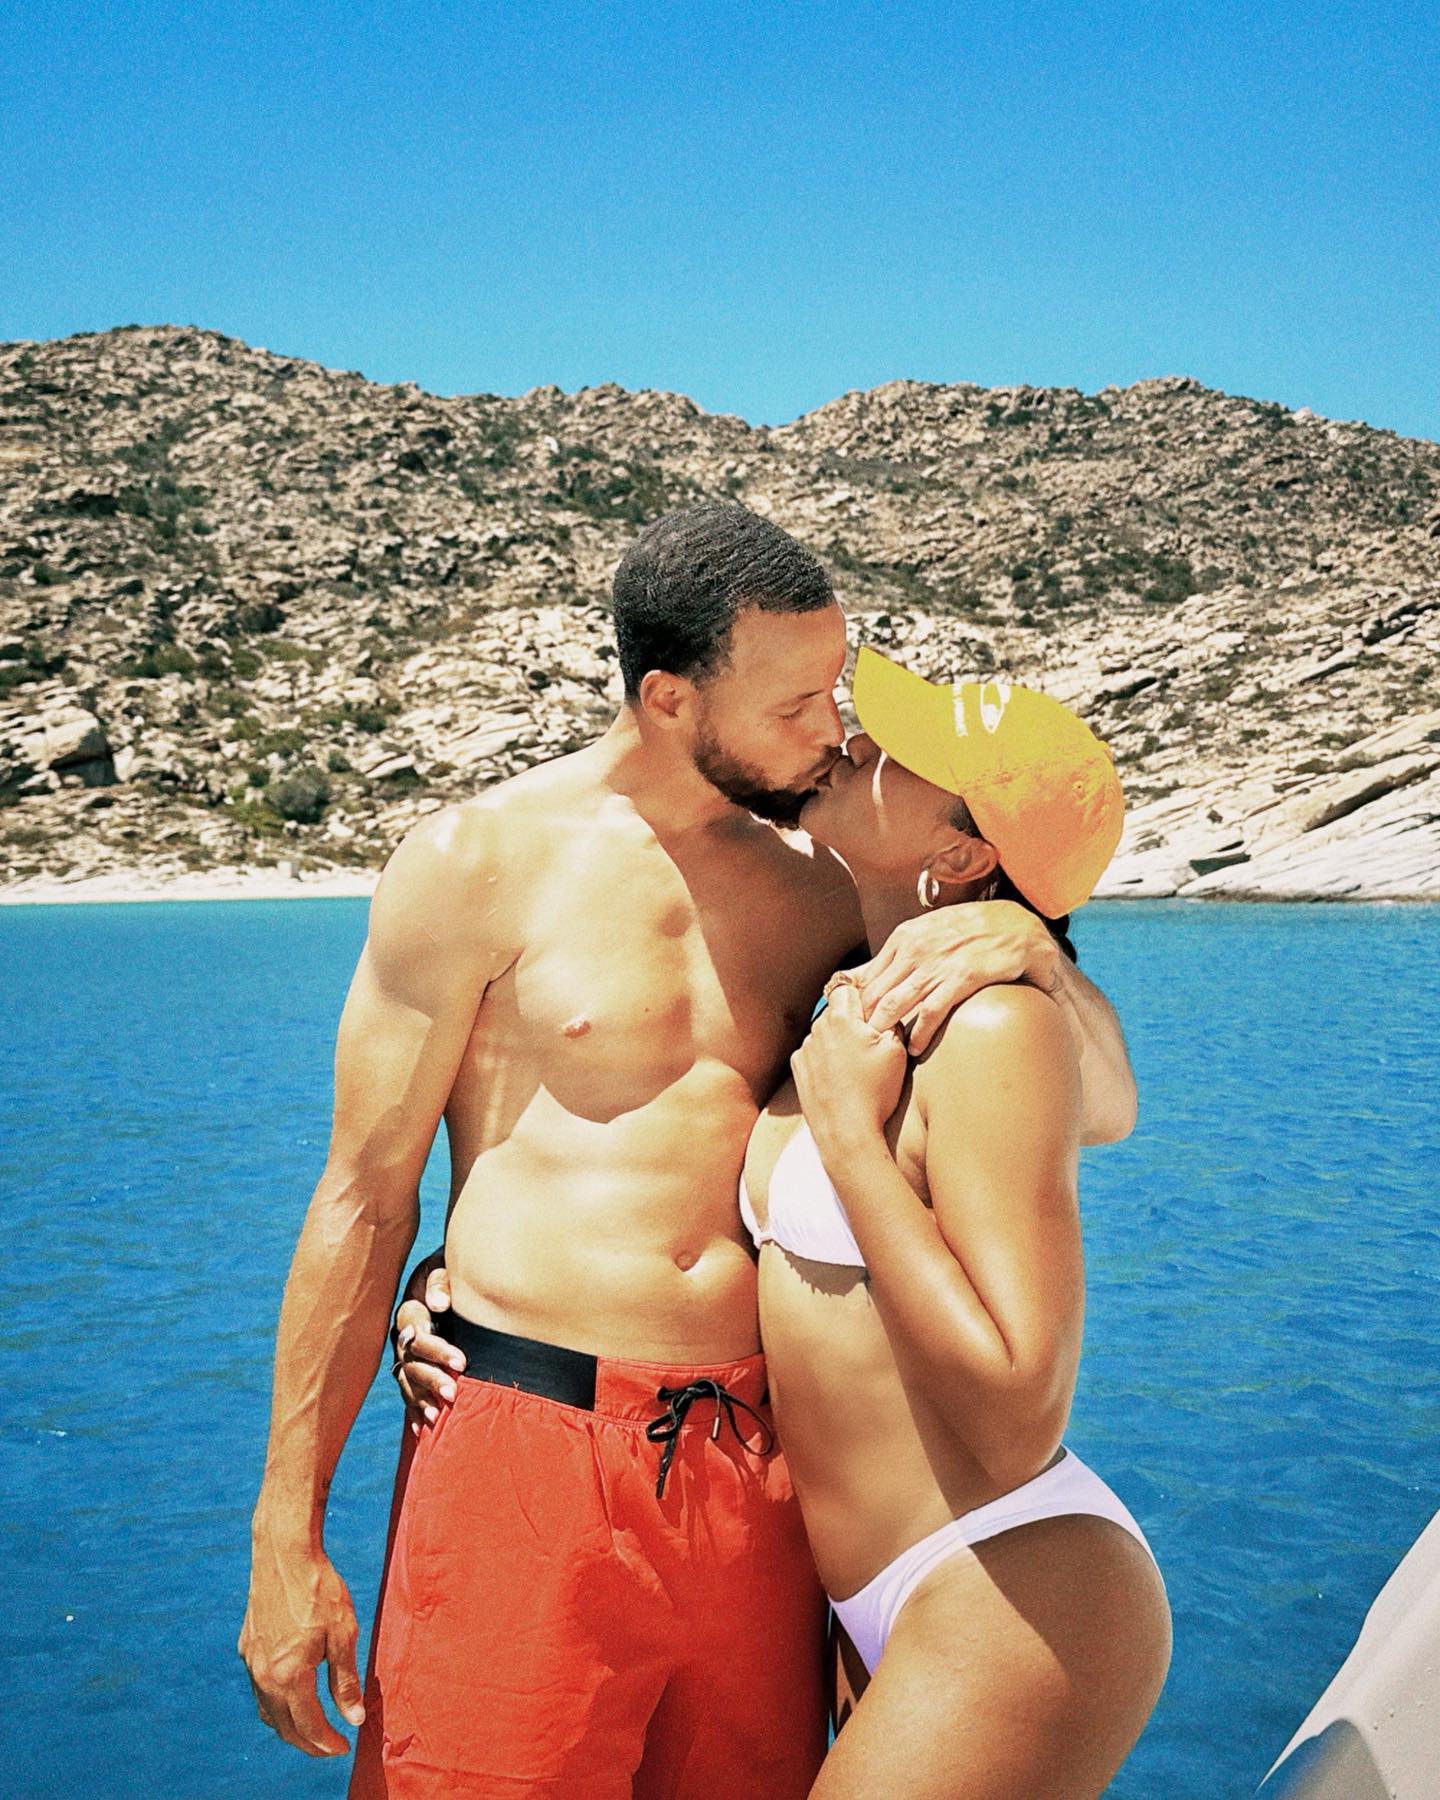 Steph Curry Flashes Abs for Wife Ayesha on Anniversary Getaway